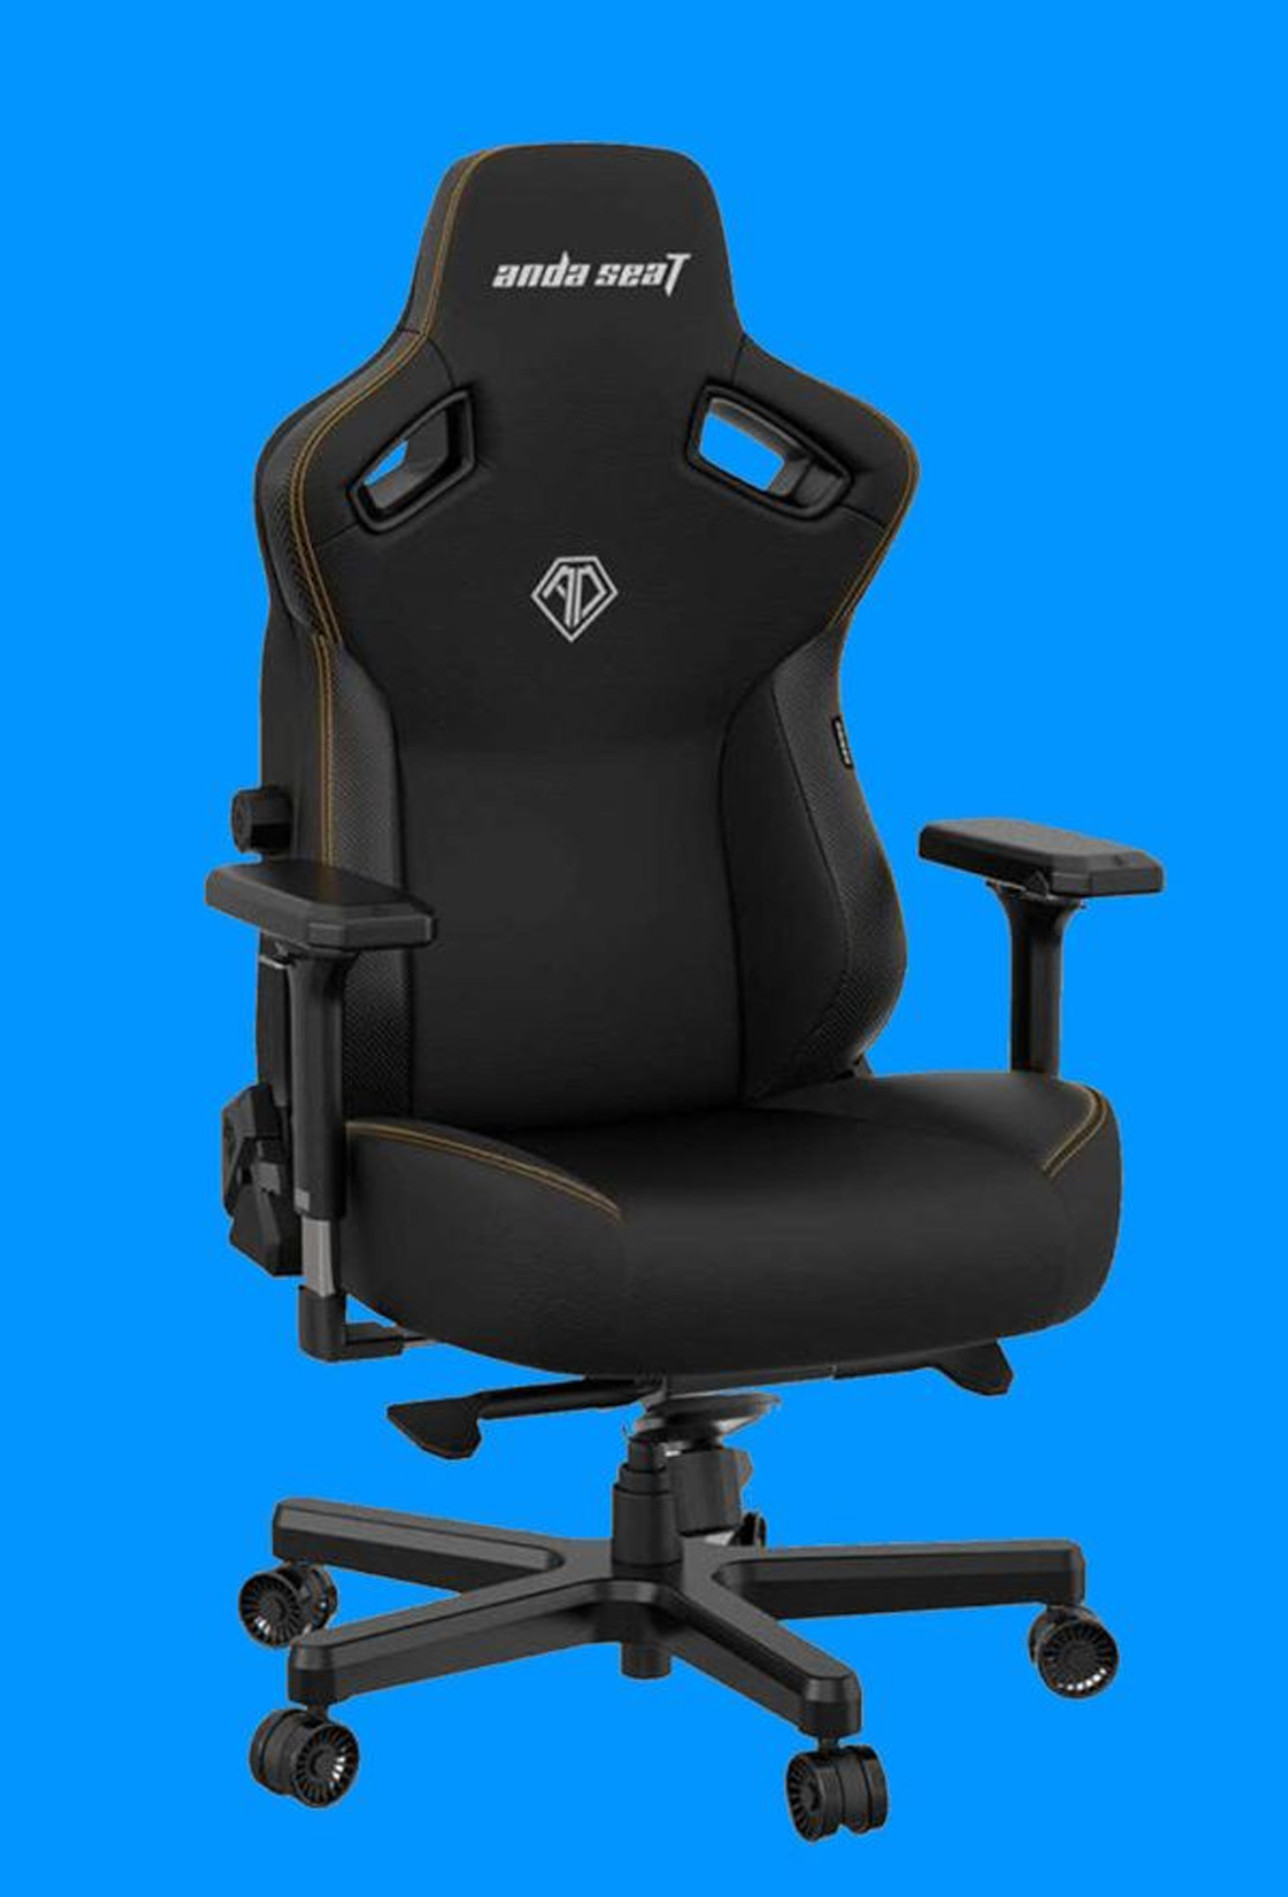 Andaseat gaming chair